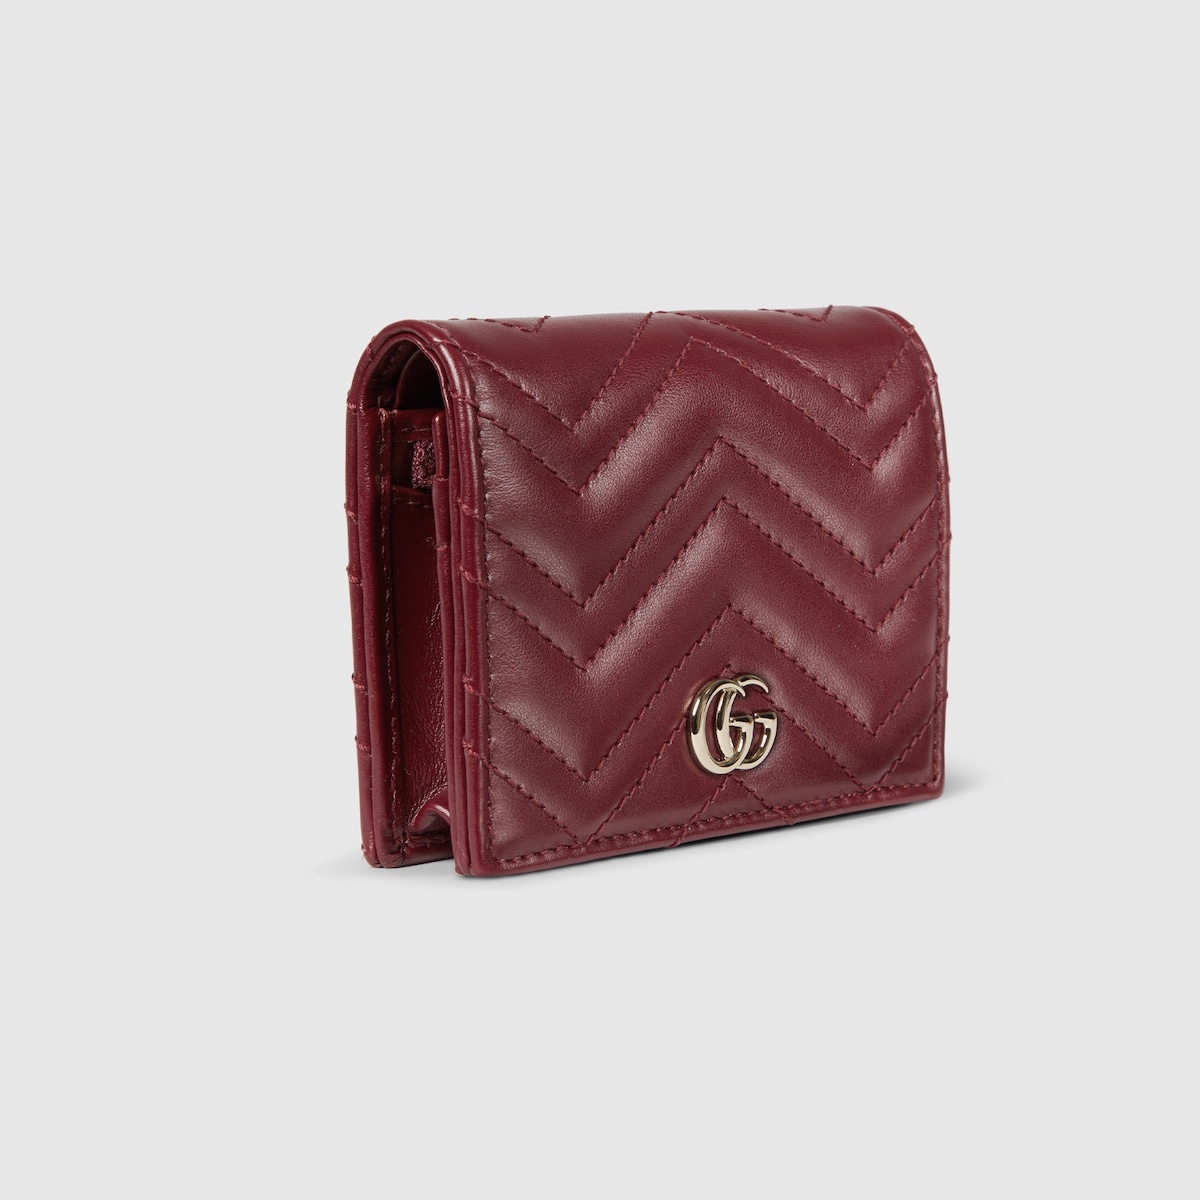 GG Marmont card case wallet - 3